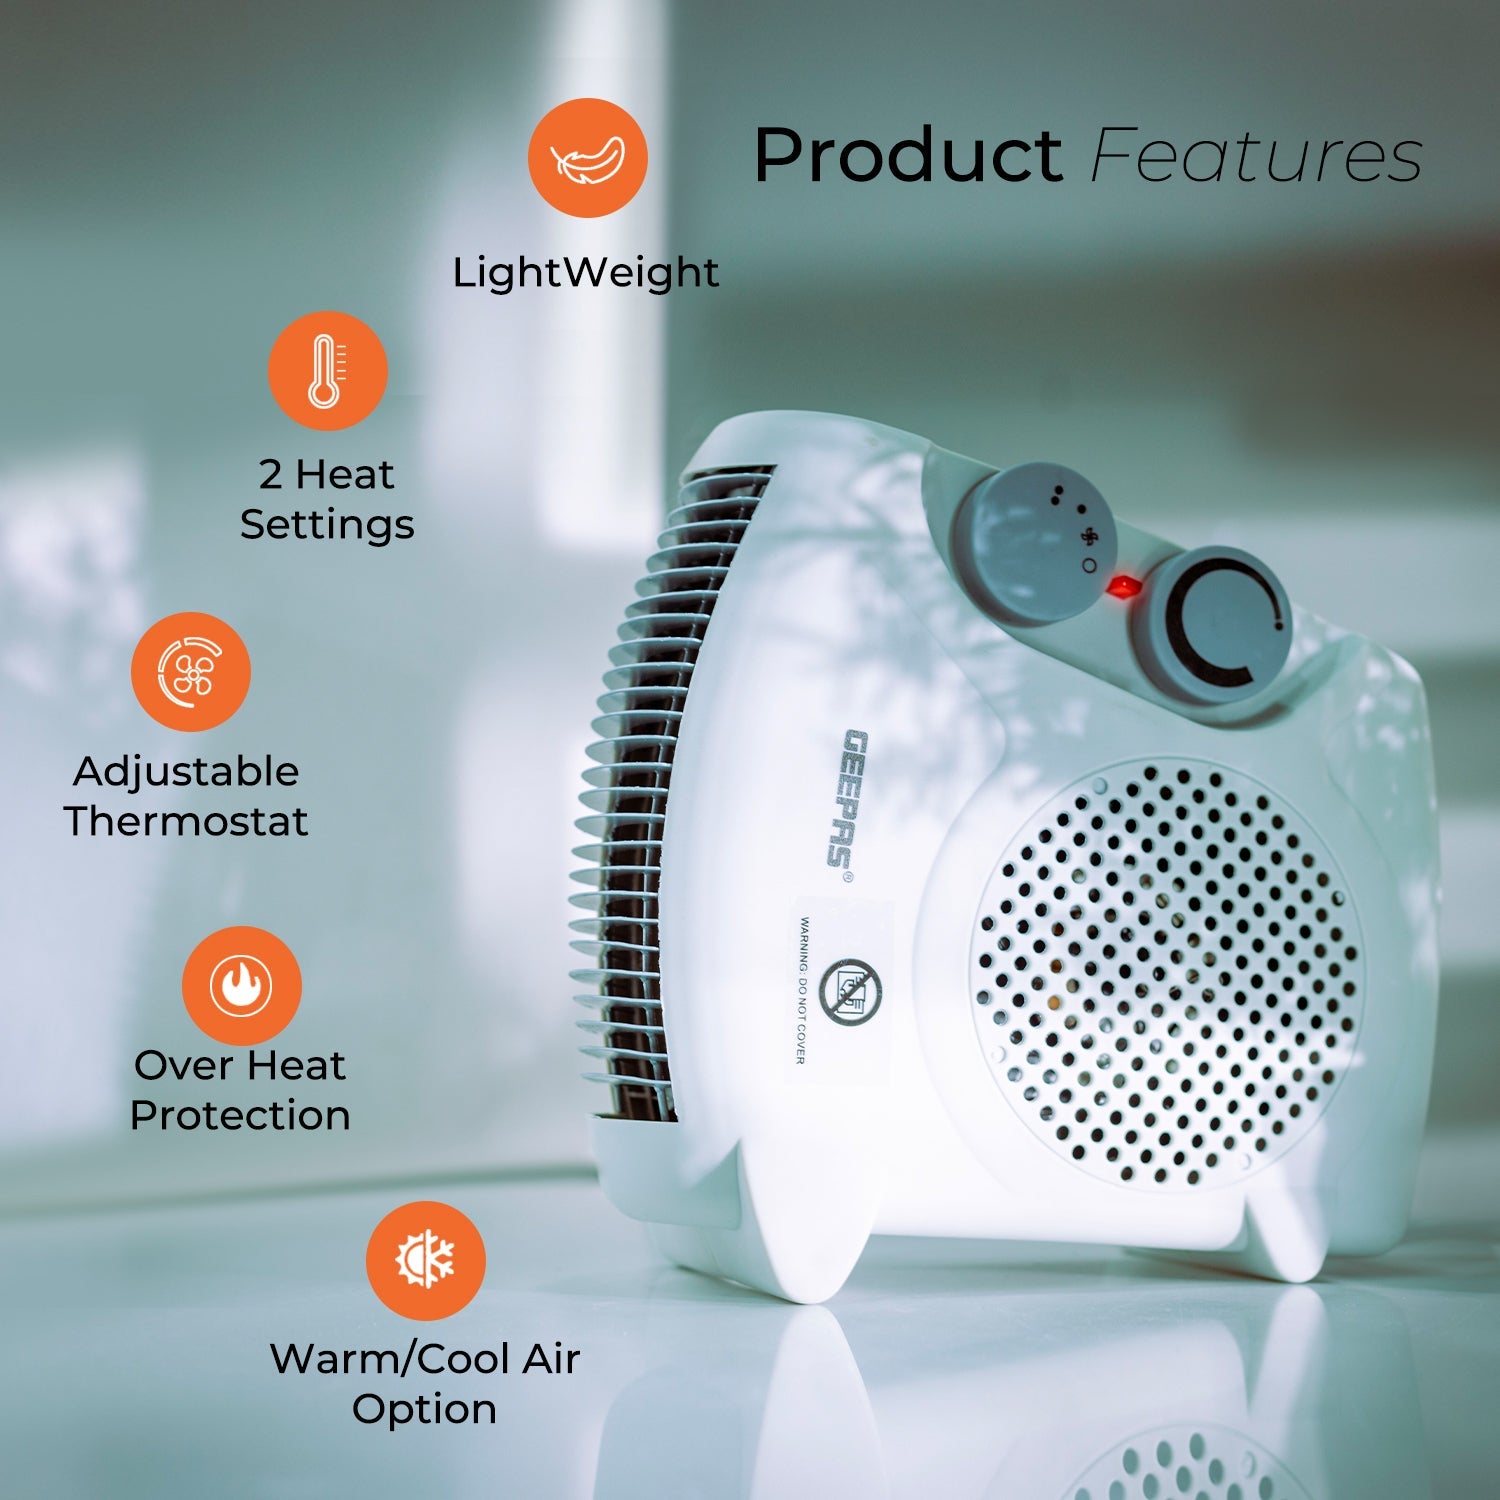 Warm & Hot Wind Lightweight Heater with Cool 2 Years Warranty Adjustable Thermostat with 2 Heat Settings 1000-2000W & Overheat Protection Geepas Portable Flat Fan Heater Upright or Flatbed 